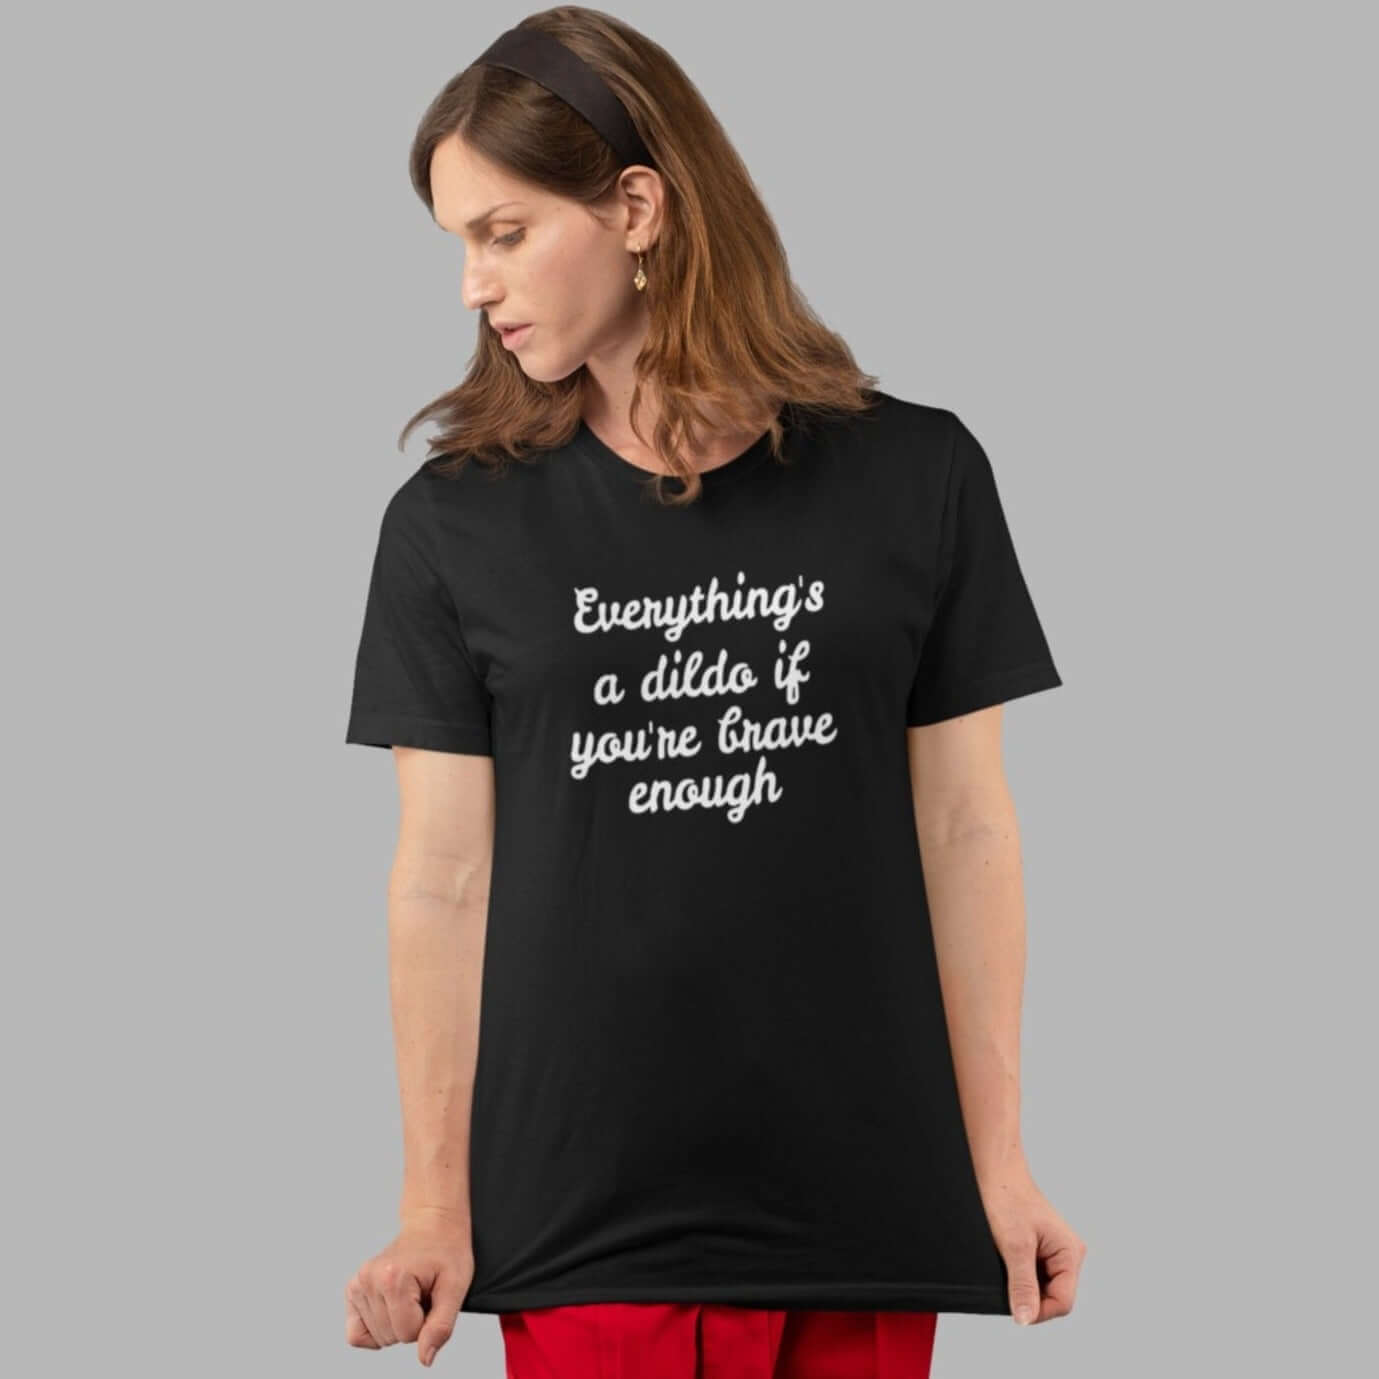 Woman wearing black t-shirt with the words Everything's a dildo if you're brave enough printed on the front.